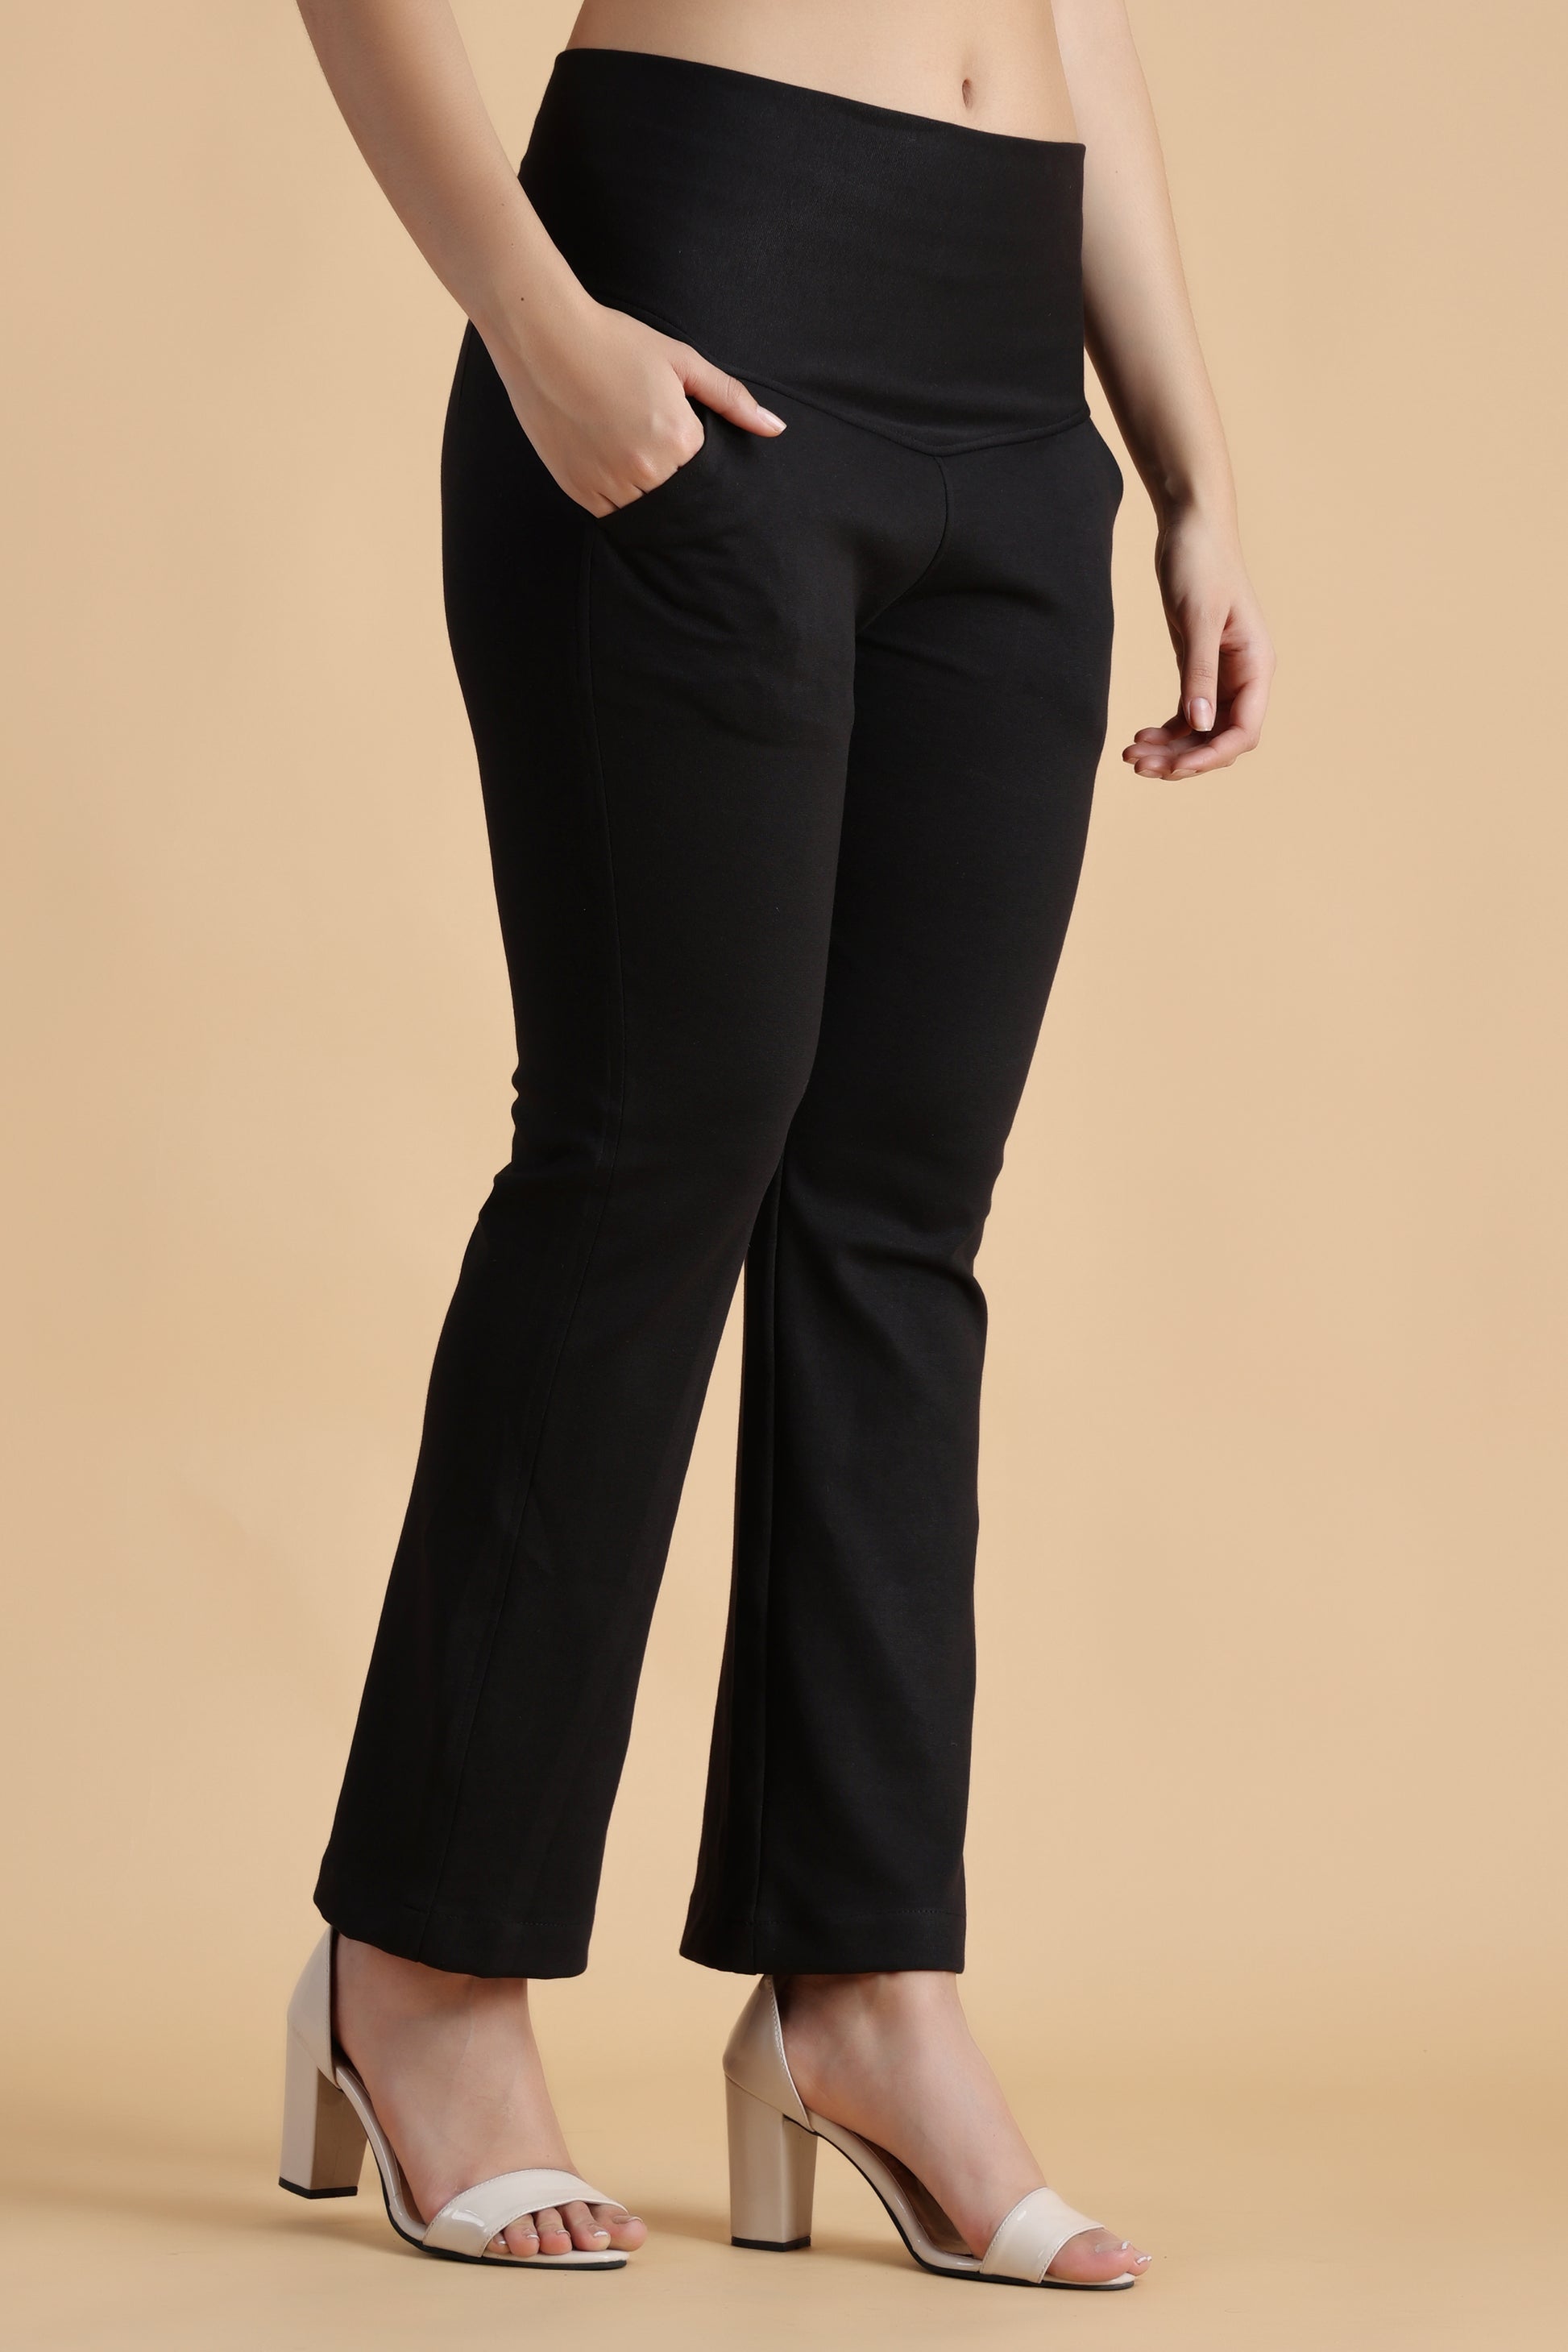 Tummy Tuck Jeans 3 - Buy Tummy Tuck Jeans 3 online in India